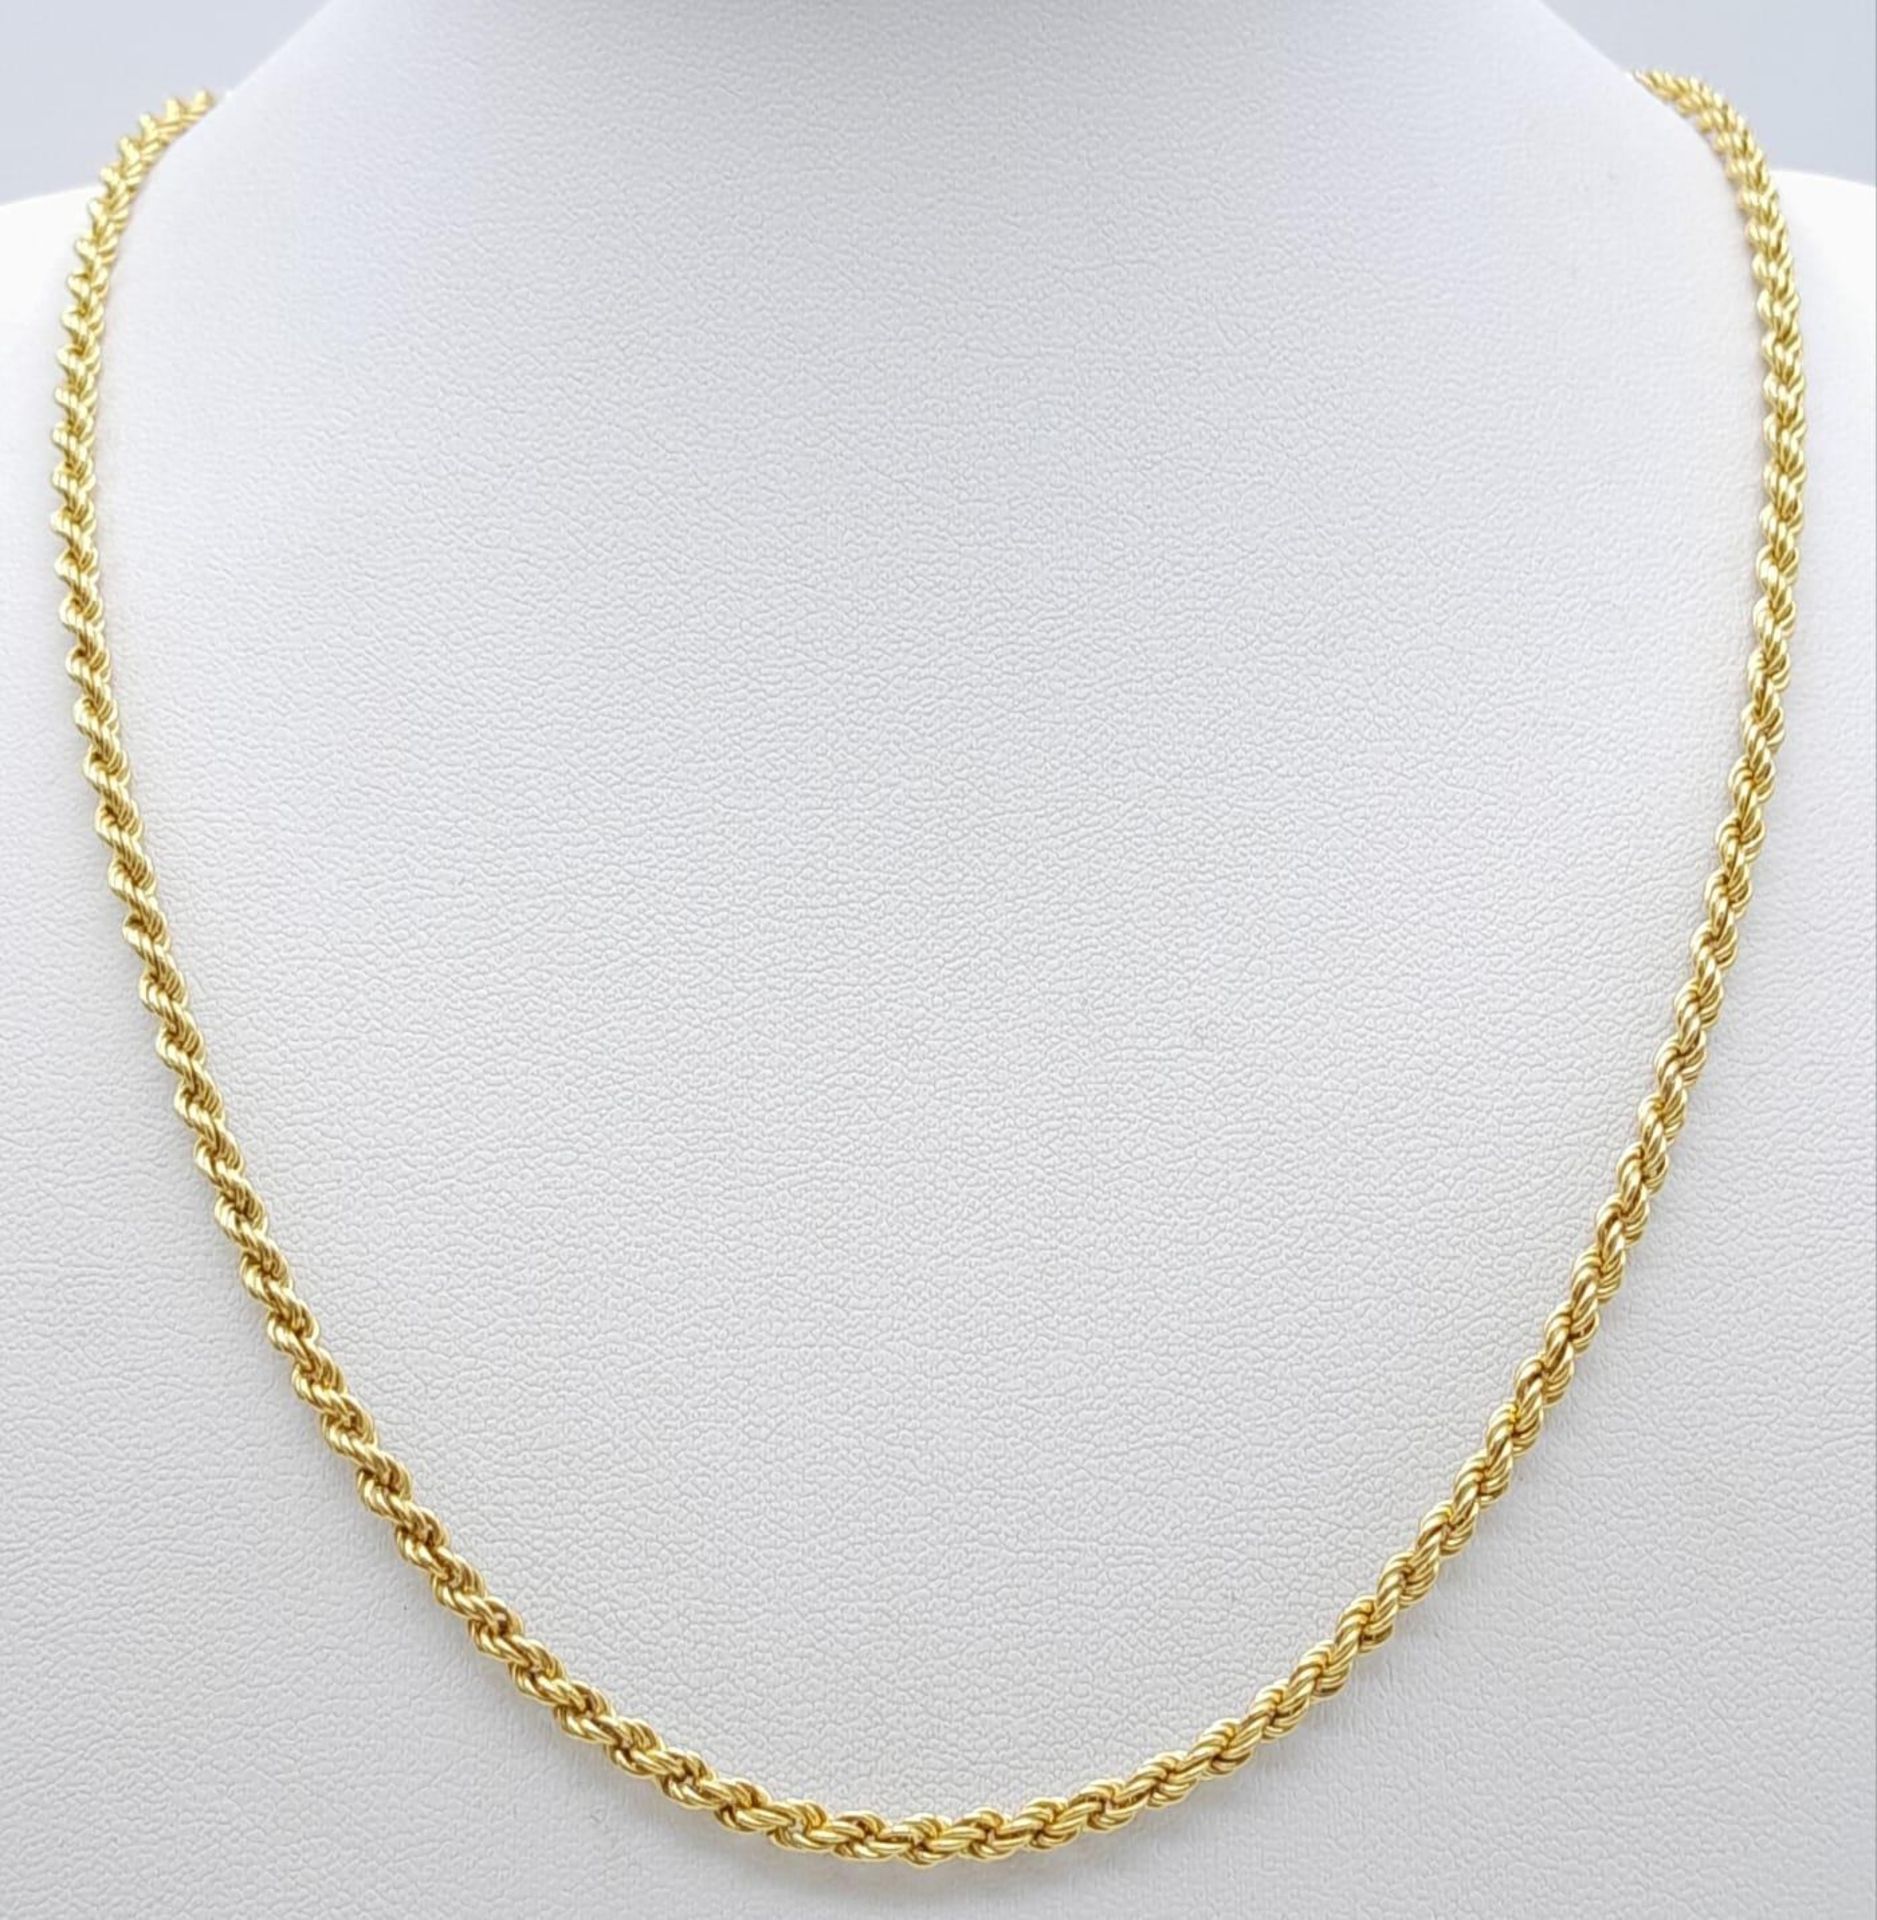 A 9K Yellow Gold Rope Necklace. 60cm length. 6.05g weight. - Image 3 of 6